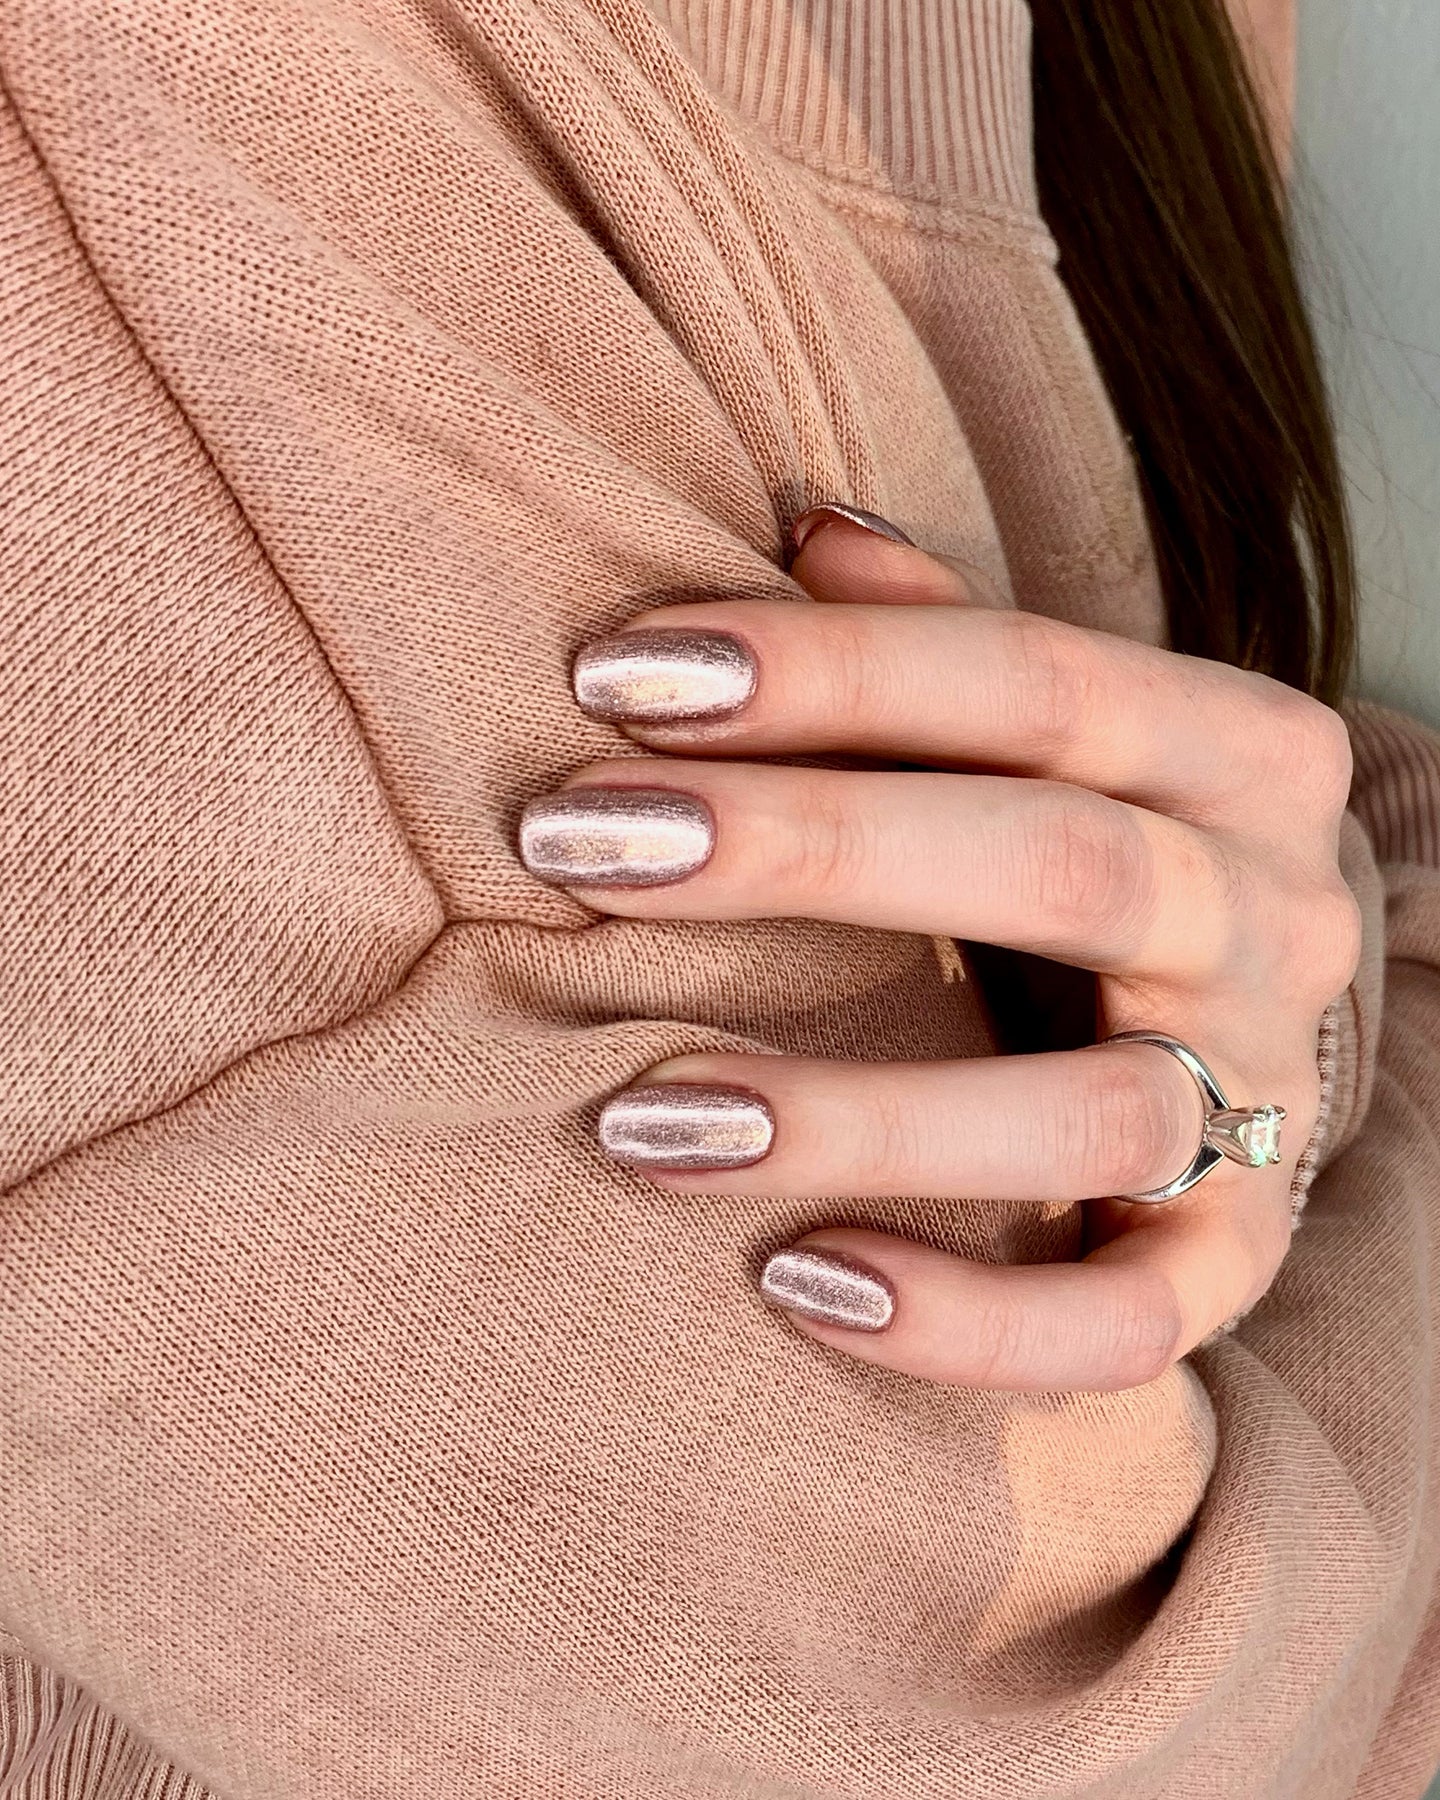 Avon - You don't dream in black and white? Then why should your nails be?  Get metallic shine nails that match your #TrueMania with the Luminous Glow  Mirror Shine Nail Enamel. . #